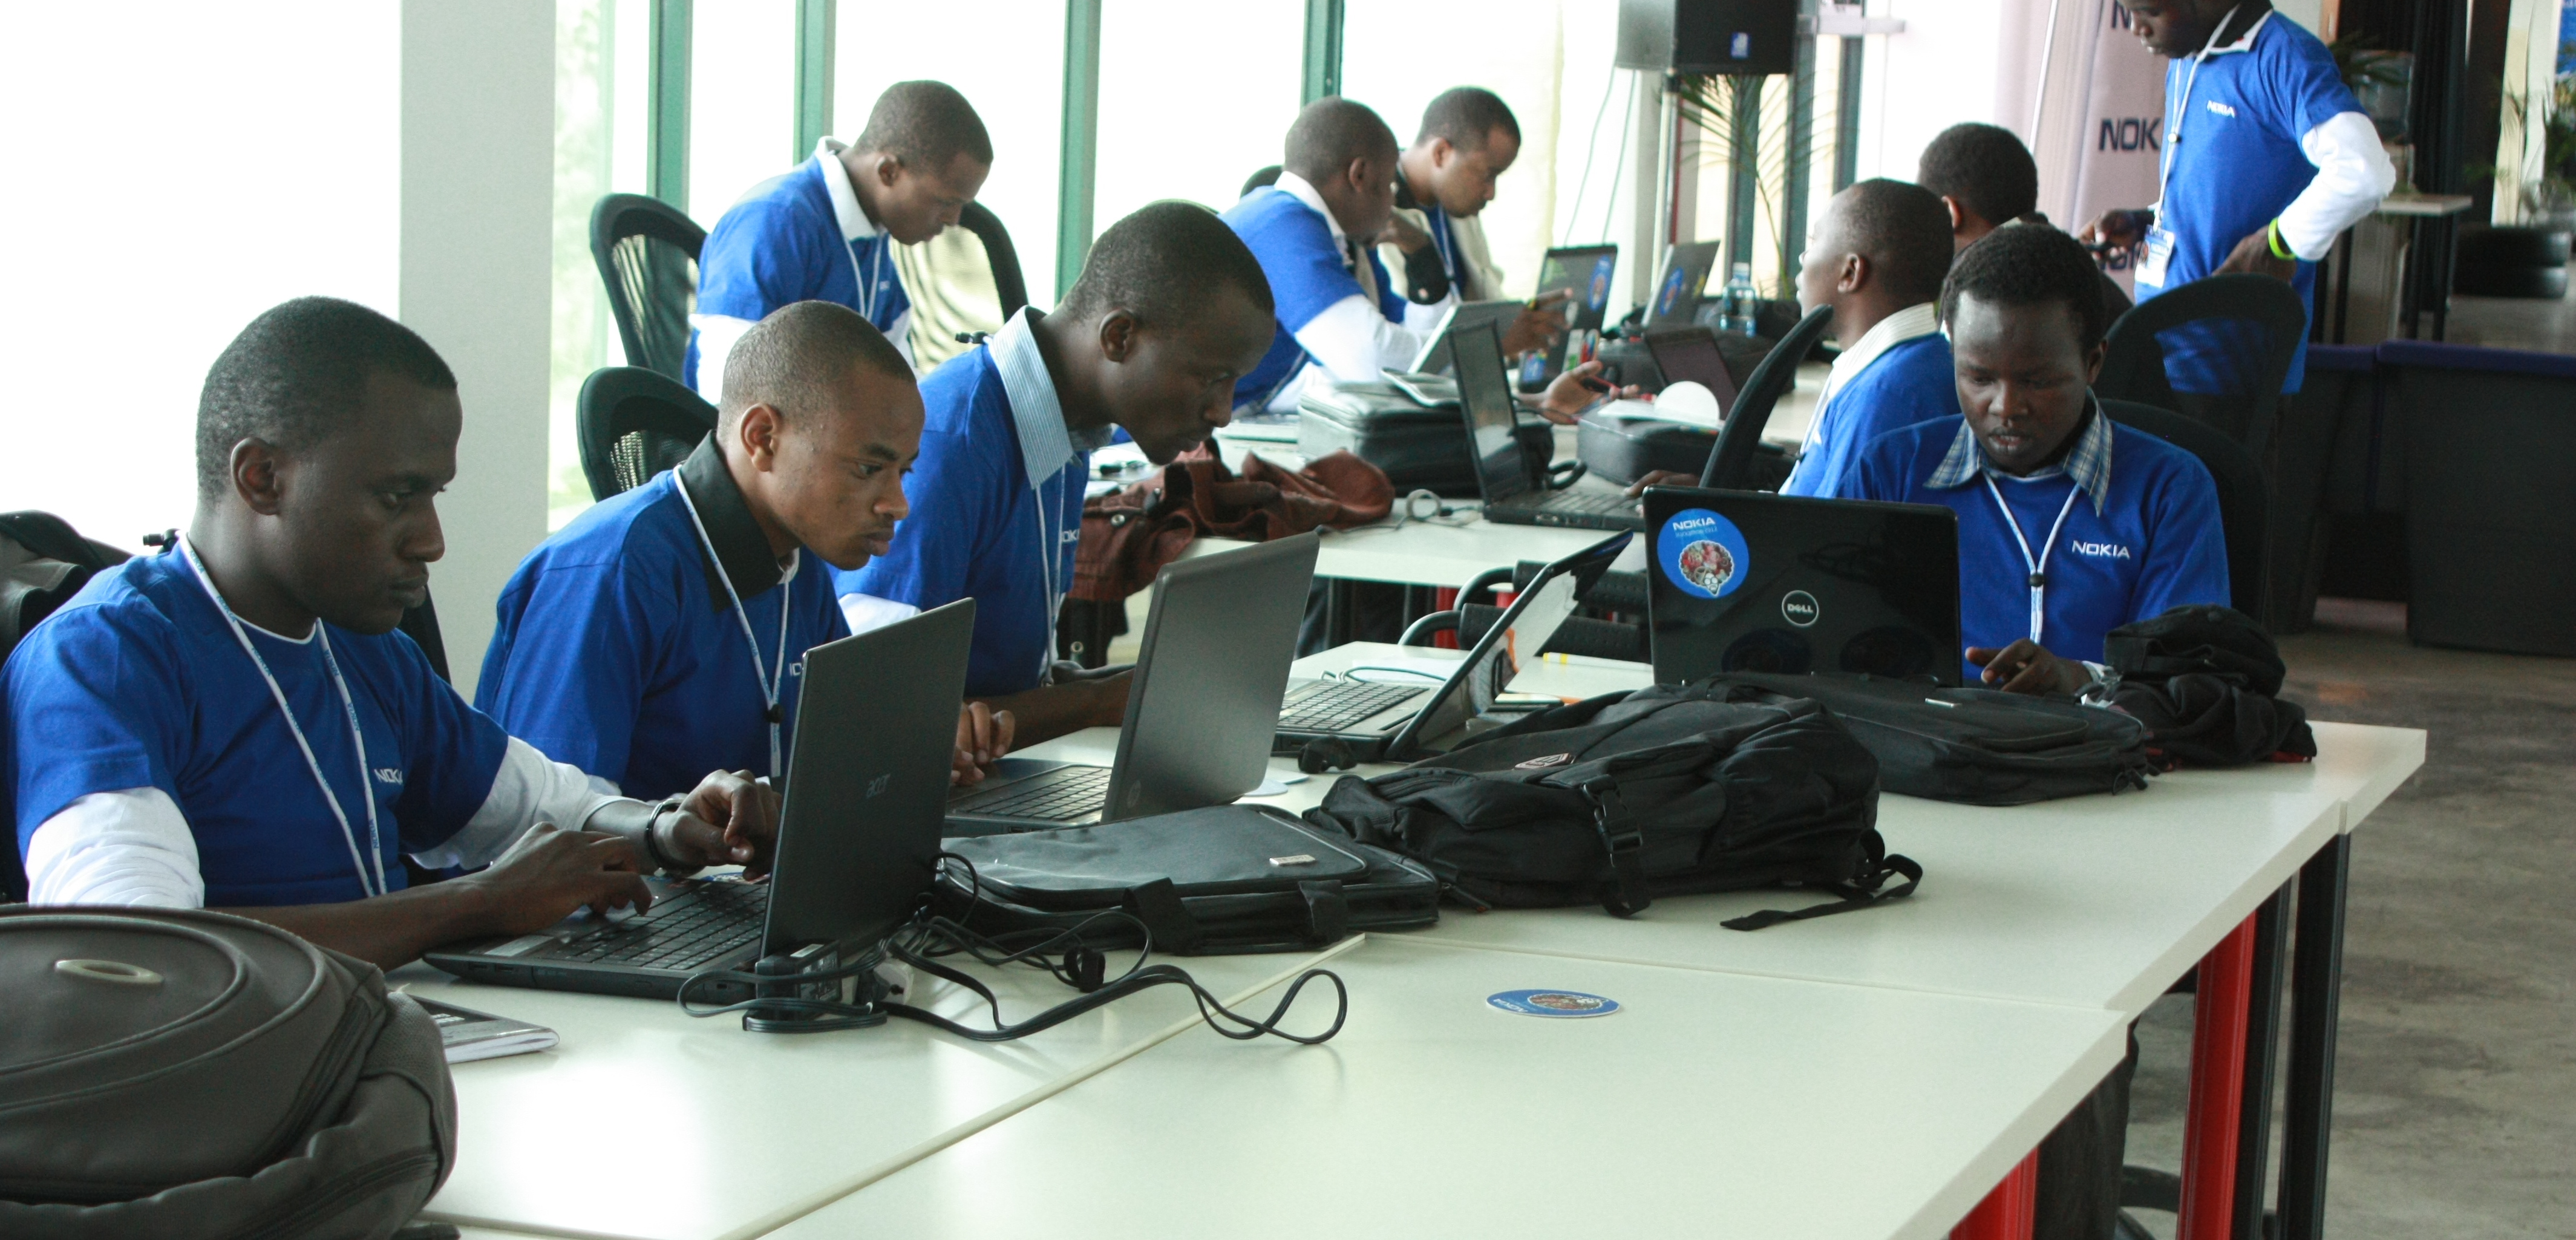 Picture: Showing are the Kenyan software developers participating in a hackathon organised by Nokia in June 2012. However, Internet of Things has commanded the attention of developers and tech professionals alike. Image Credit: Developlocal